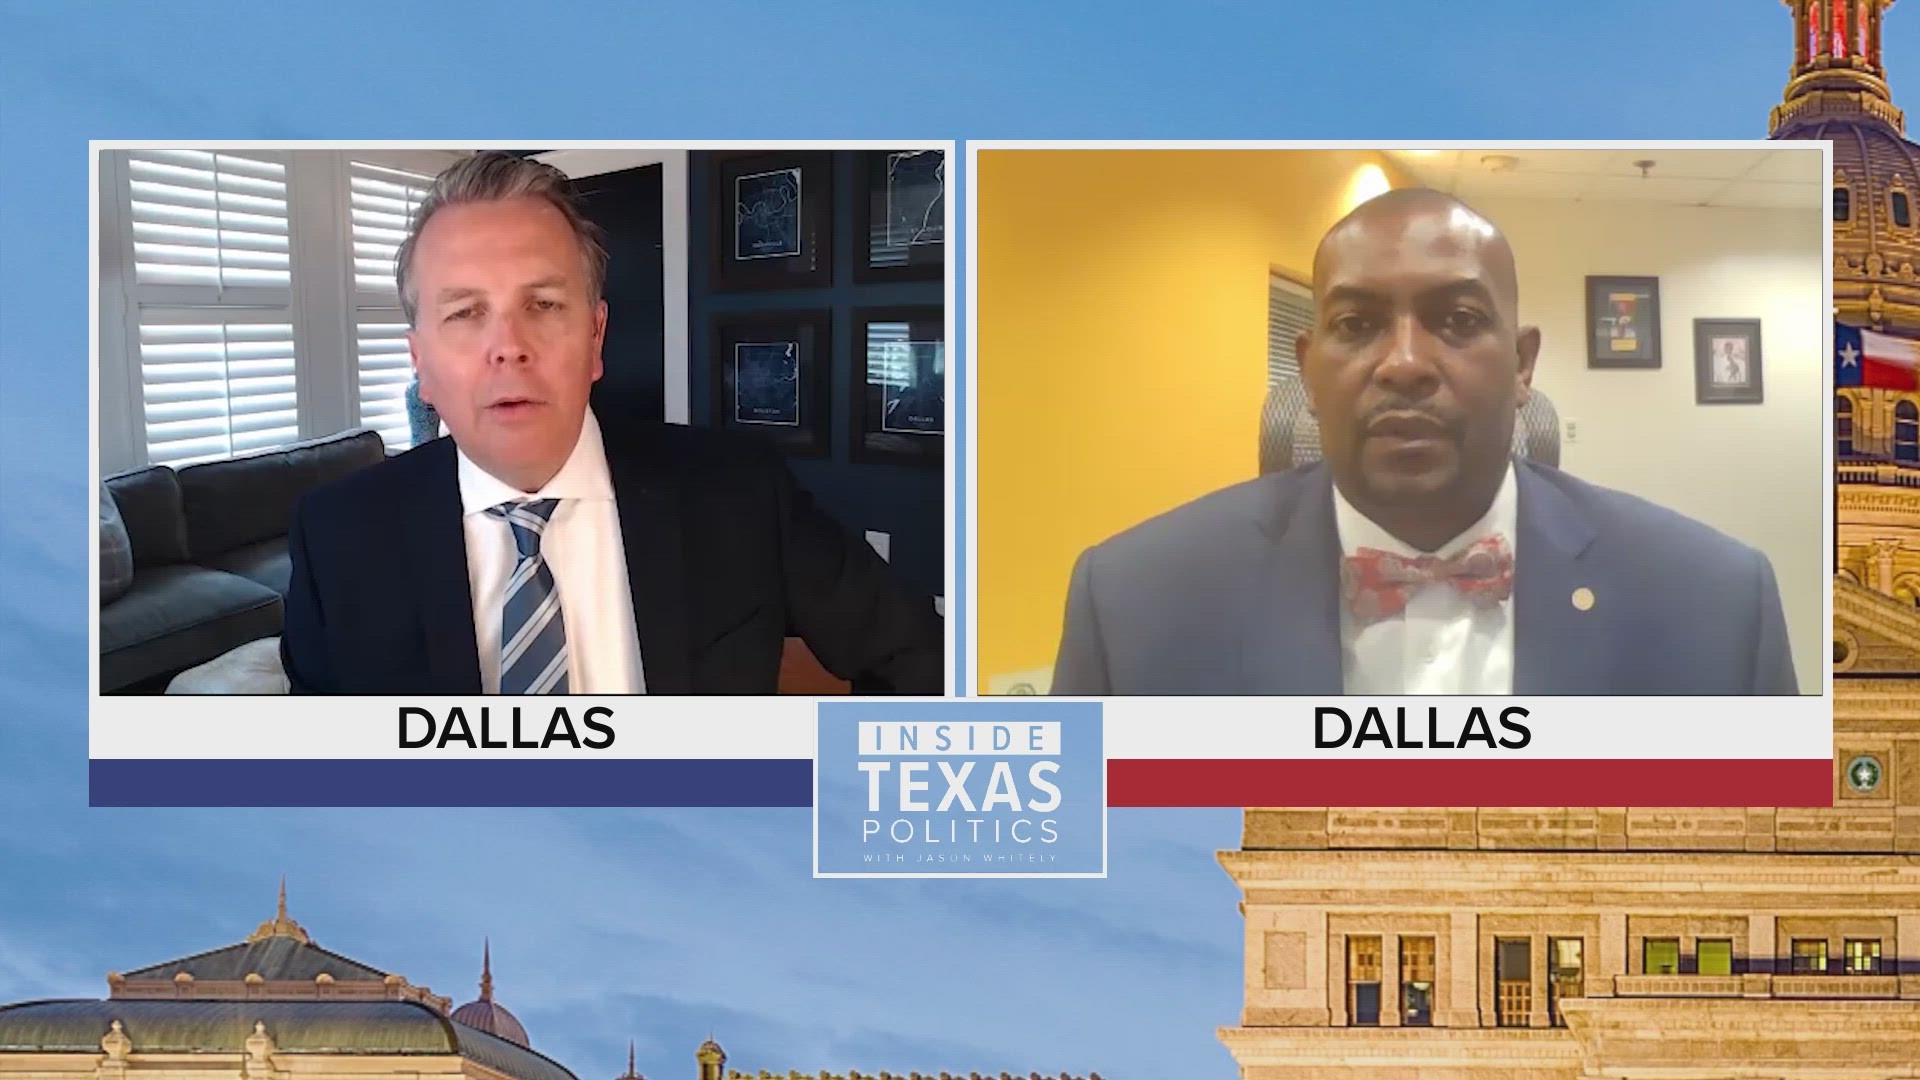 Dallas City Council will vote this week on a plan to make home ownership more accessible. Councilmember Casey Thomas discusses the challenges and cost to taxpayers.